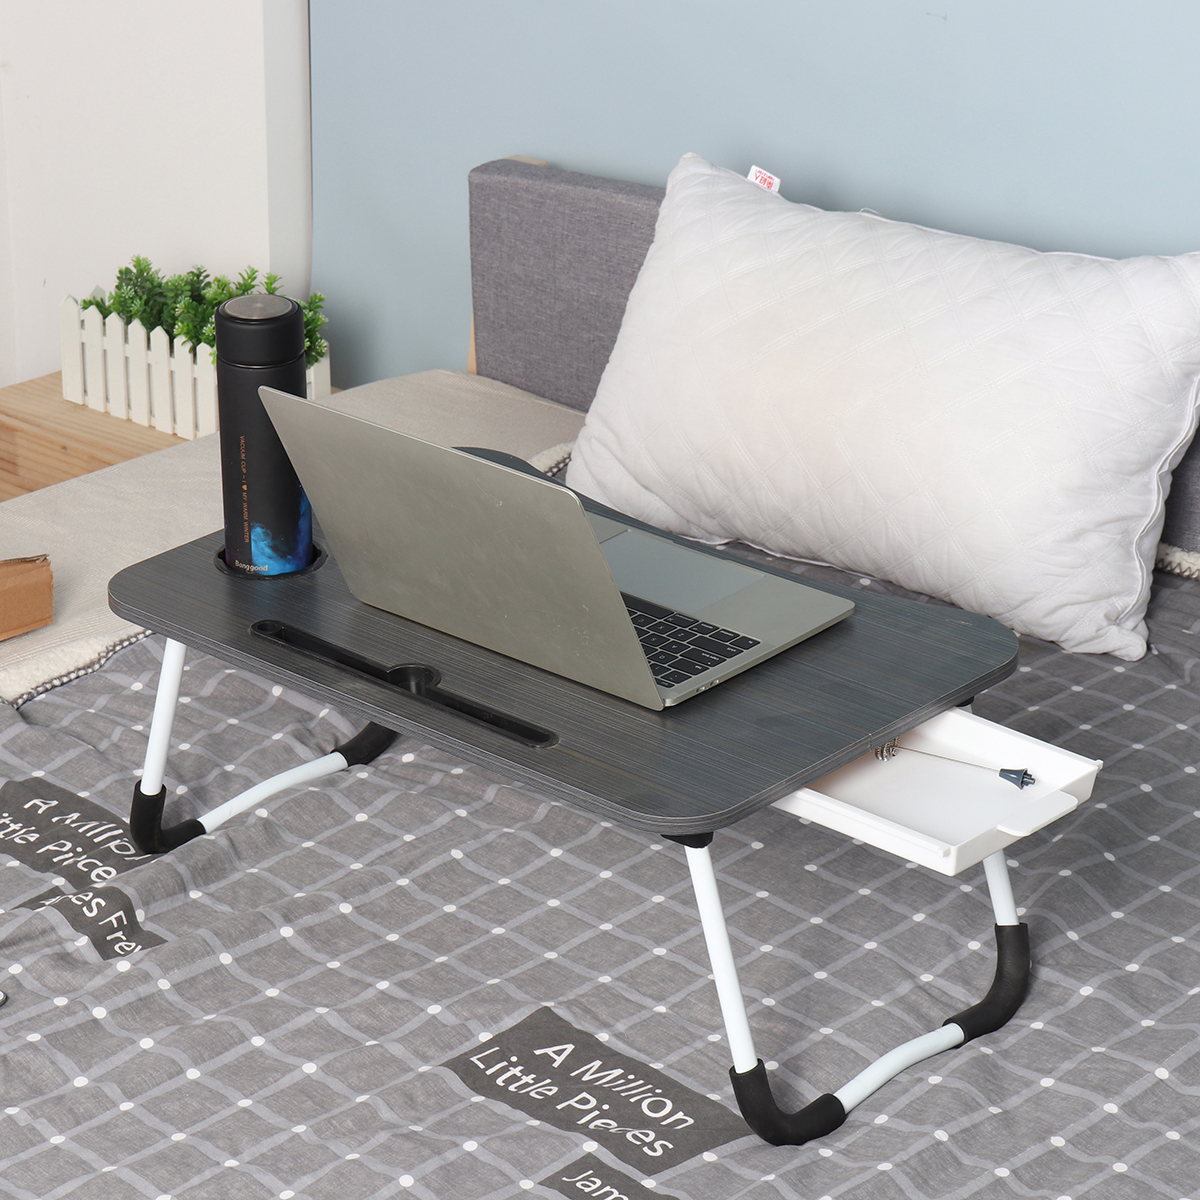 Laptop-Table-Stand-with-Small-Drawer-Portable-Folding-Desk-Notebook-Table-Stand-Lap-Tray-Bed-for-Chi-1728170-8